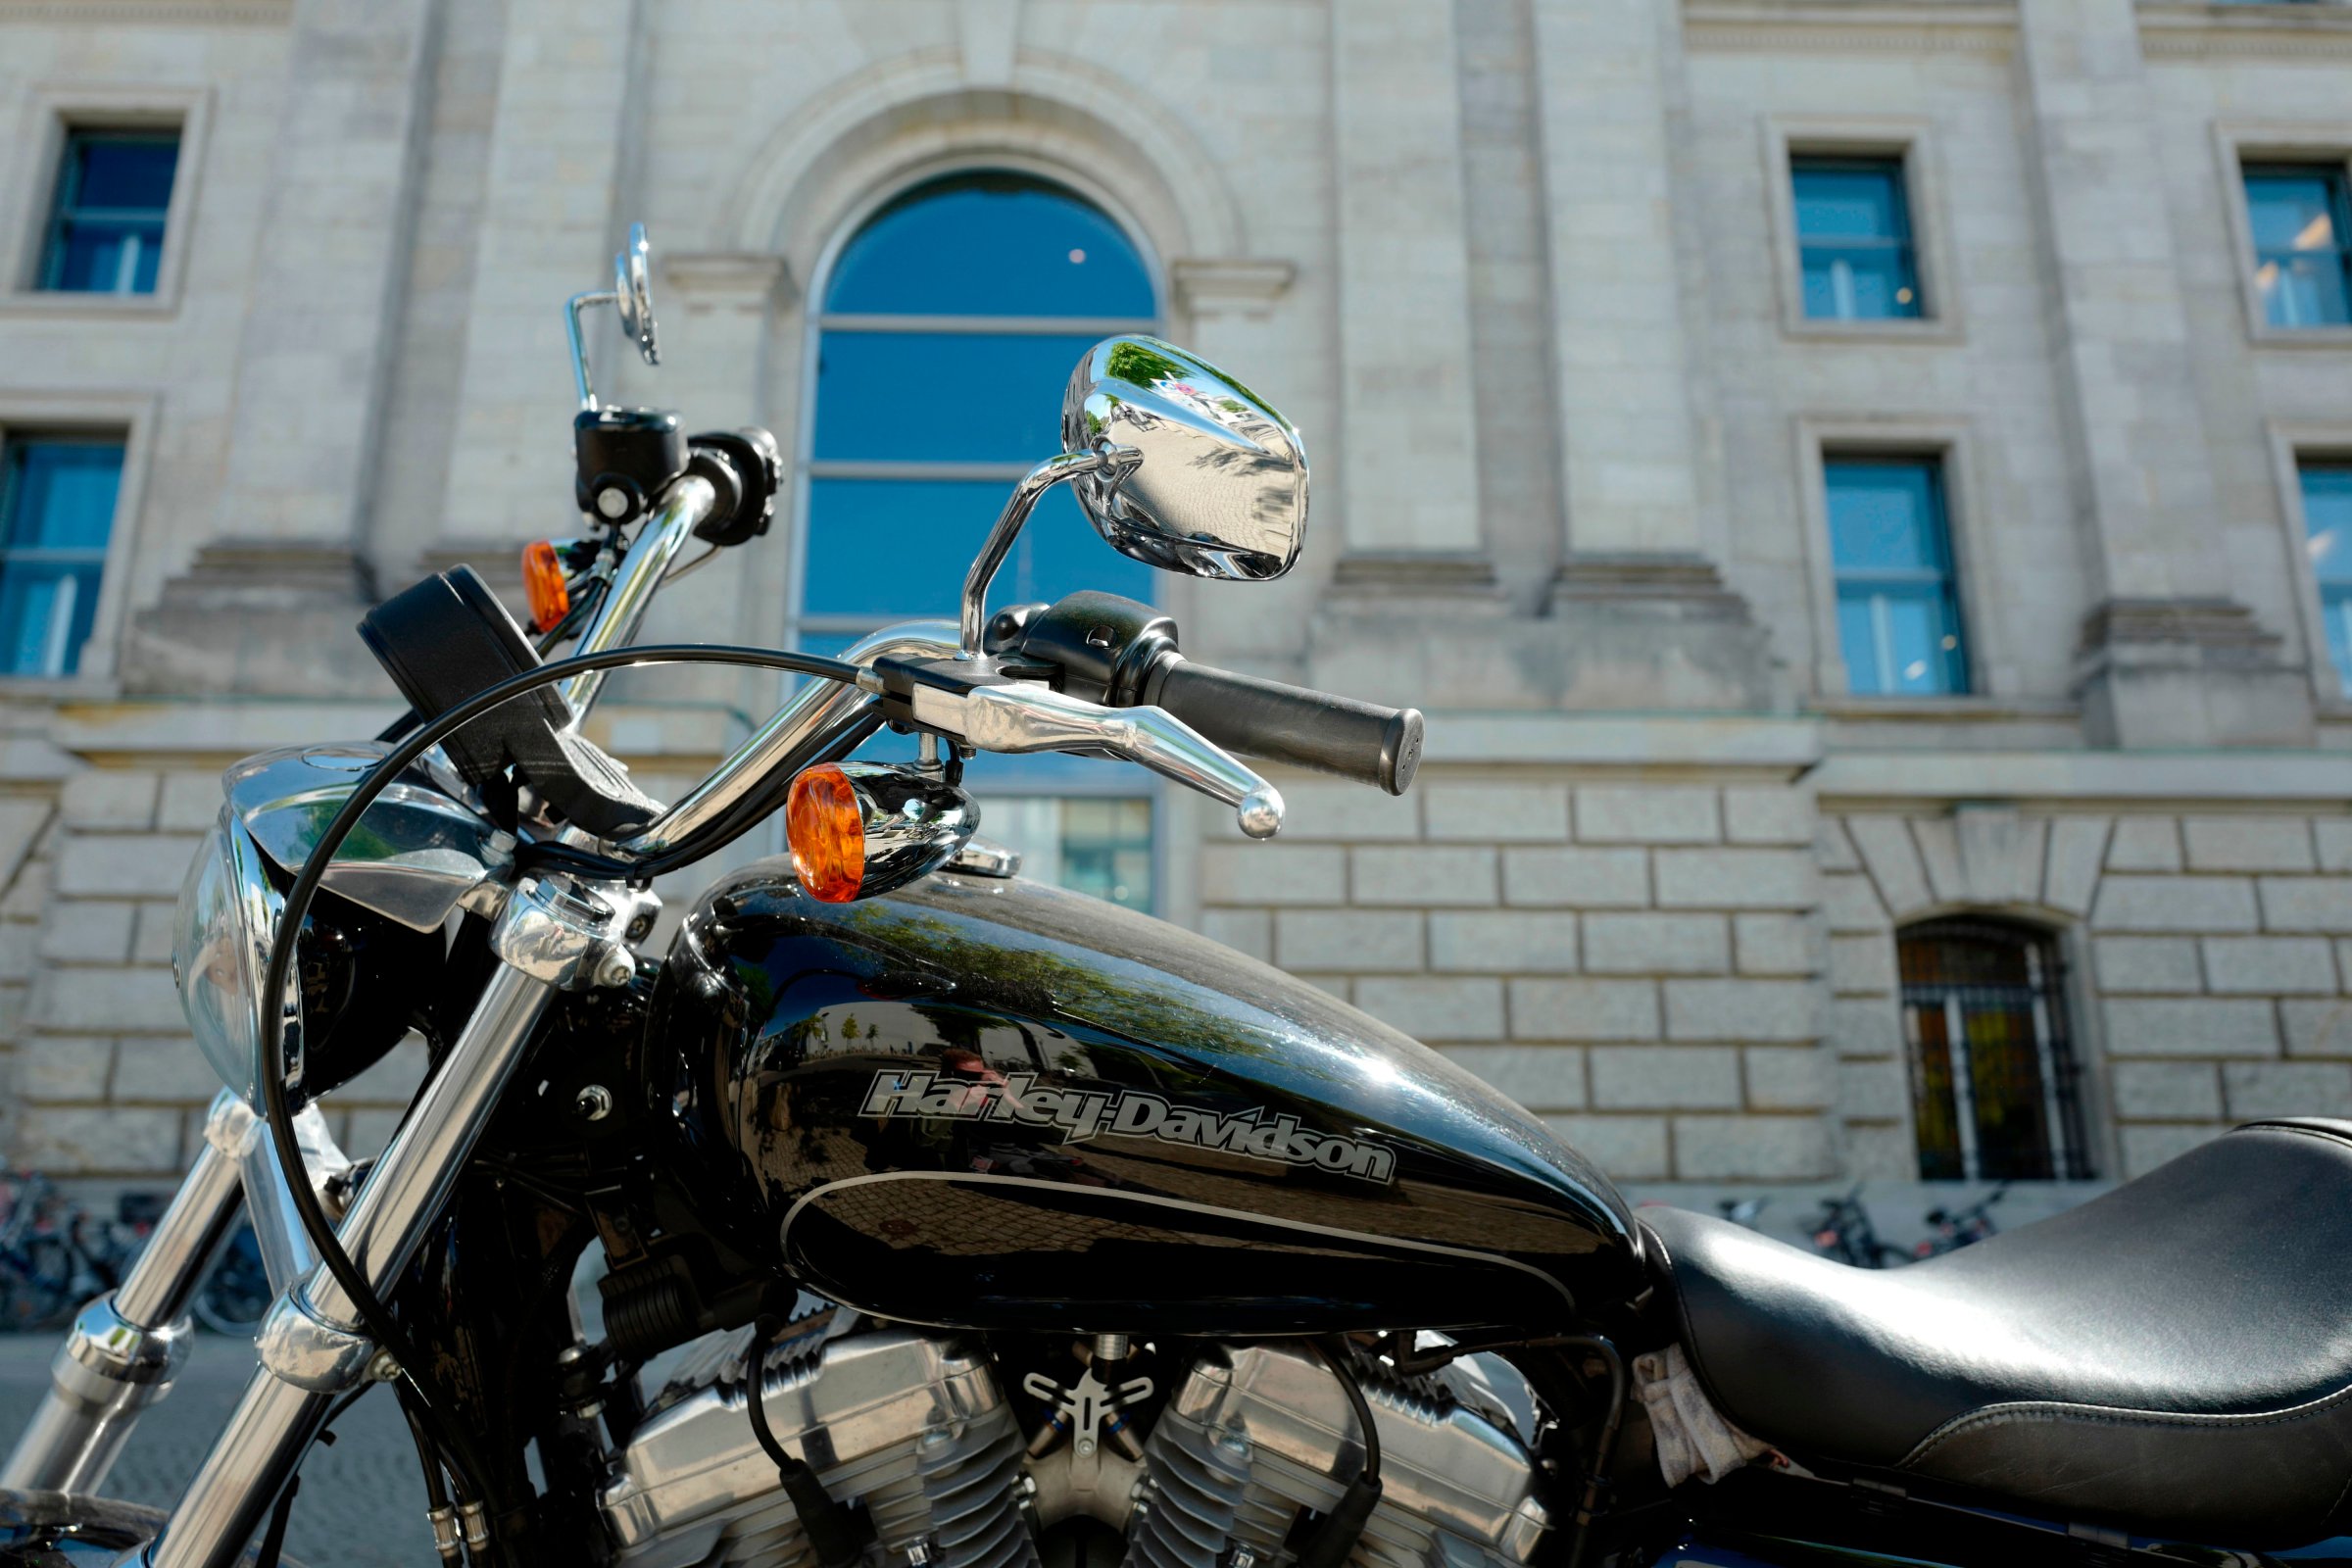 A Harley-Davidson motorbike is parked outside a European building